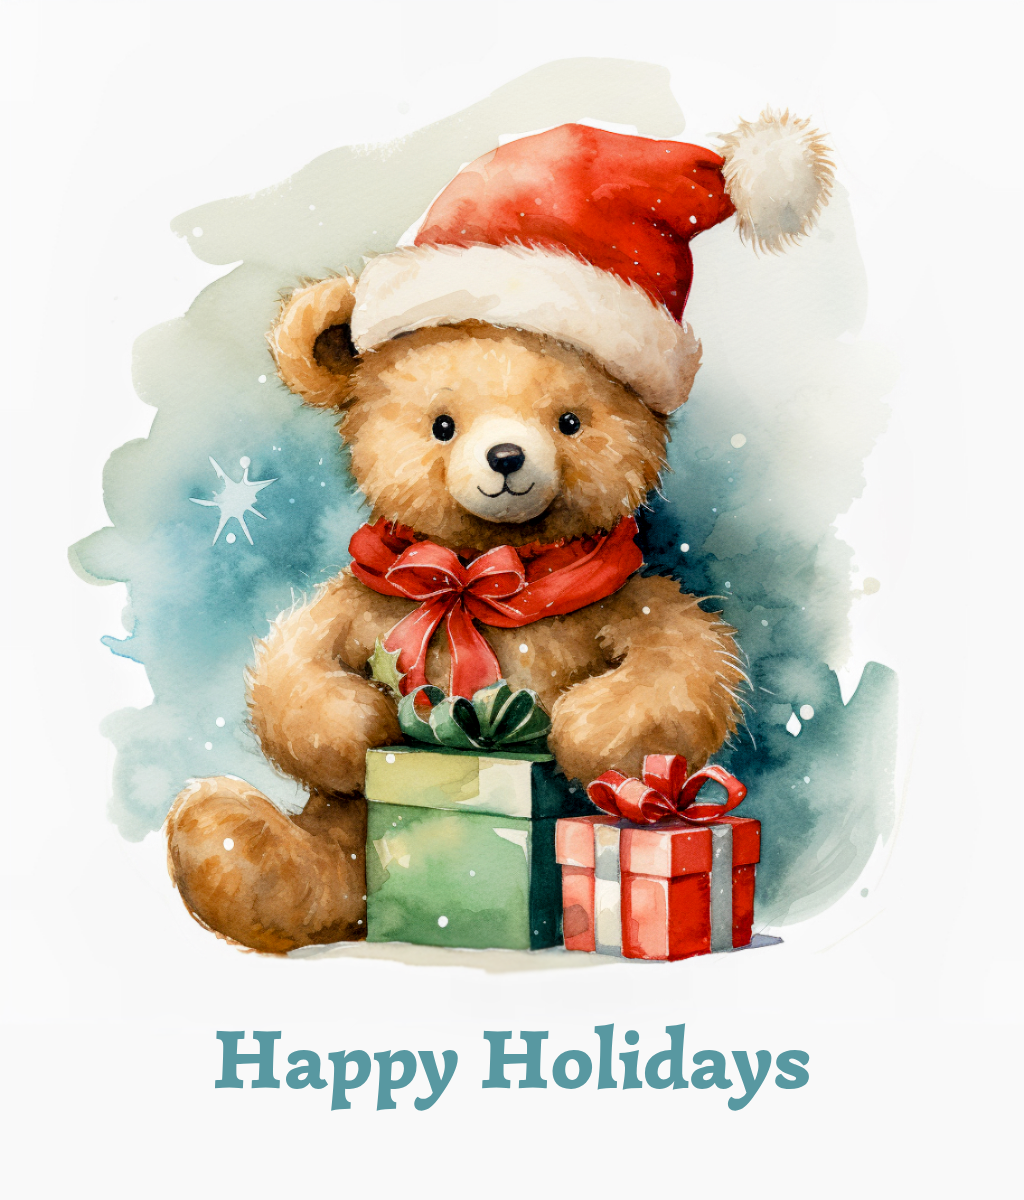 Happy Holidays - ChatGPT and Midjourney